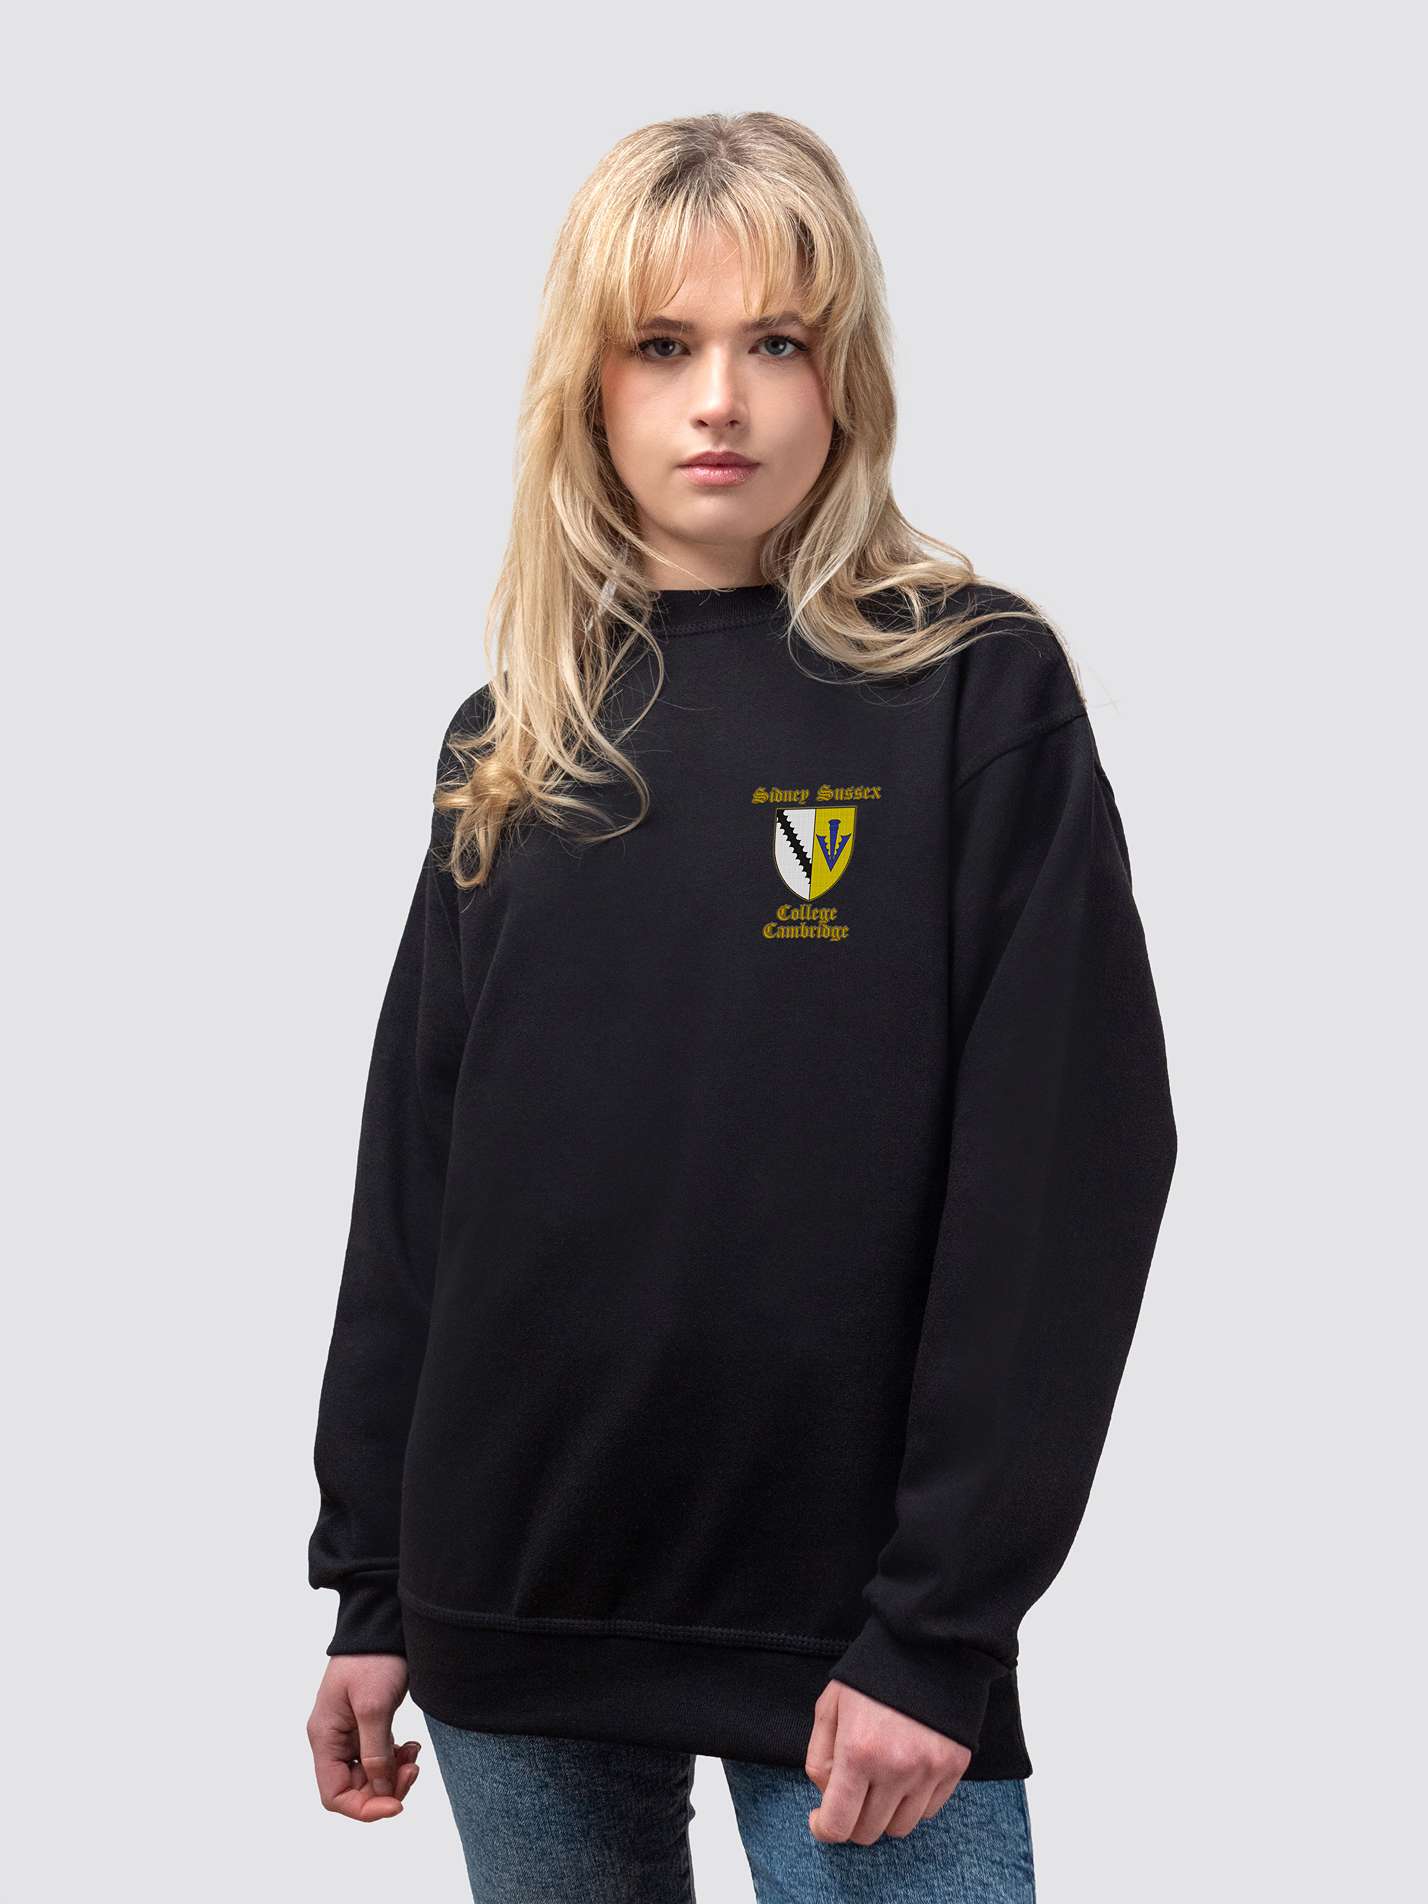 Sidney Sussex crest on the front of a black, crew-neck sweatshirt